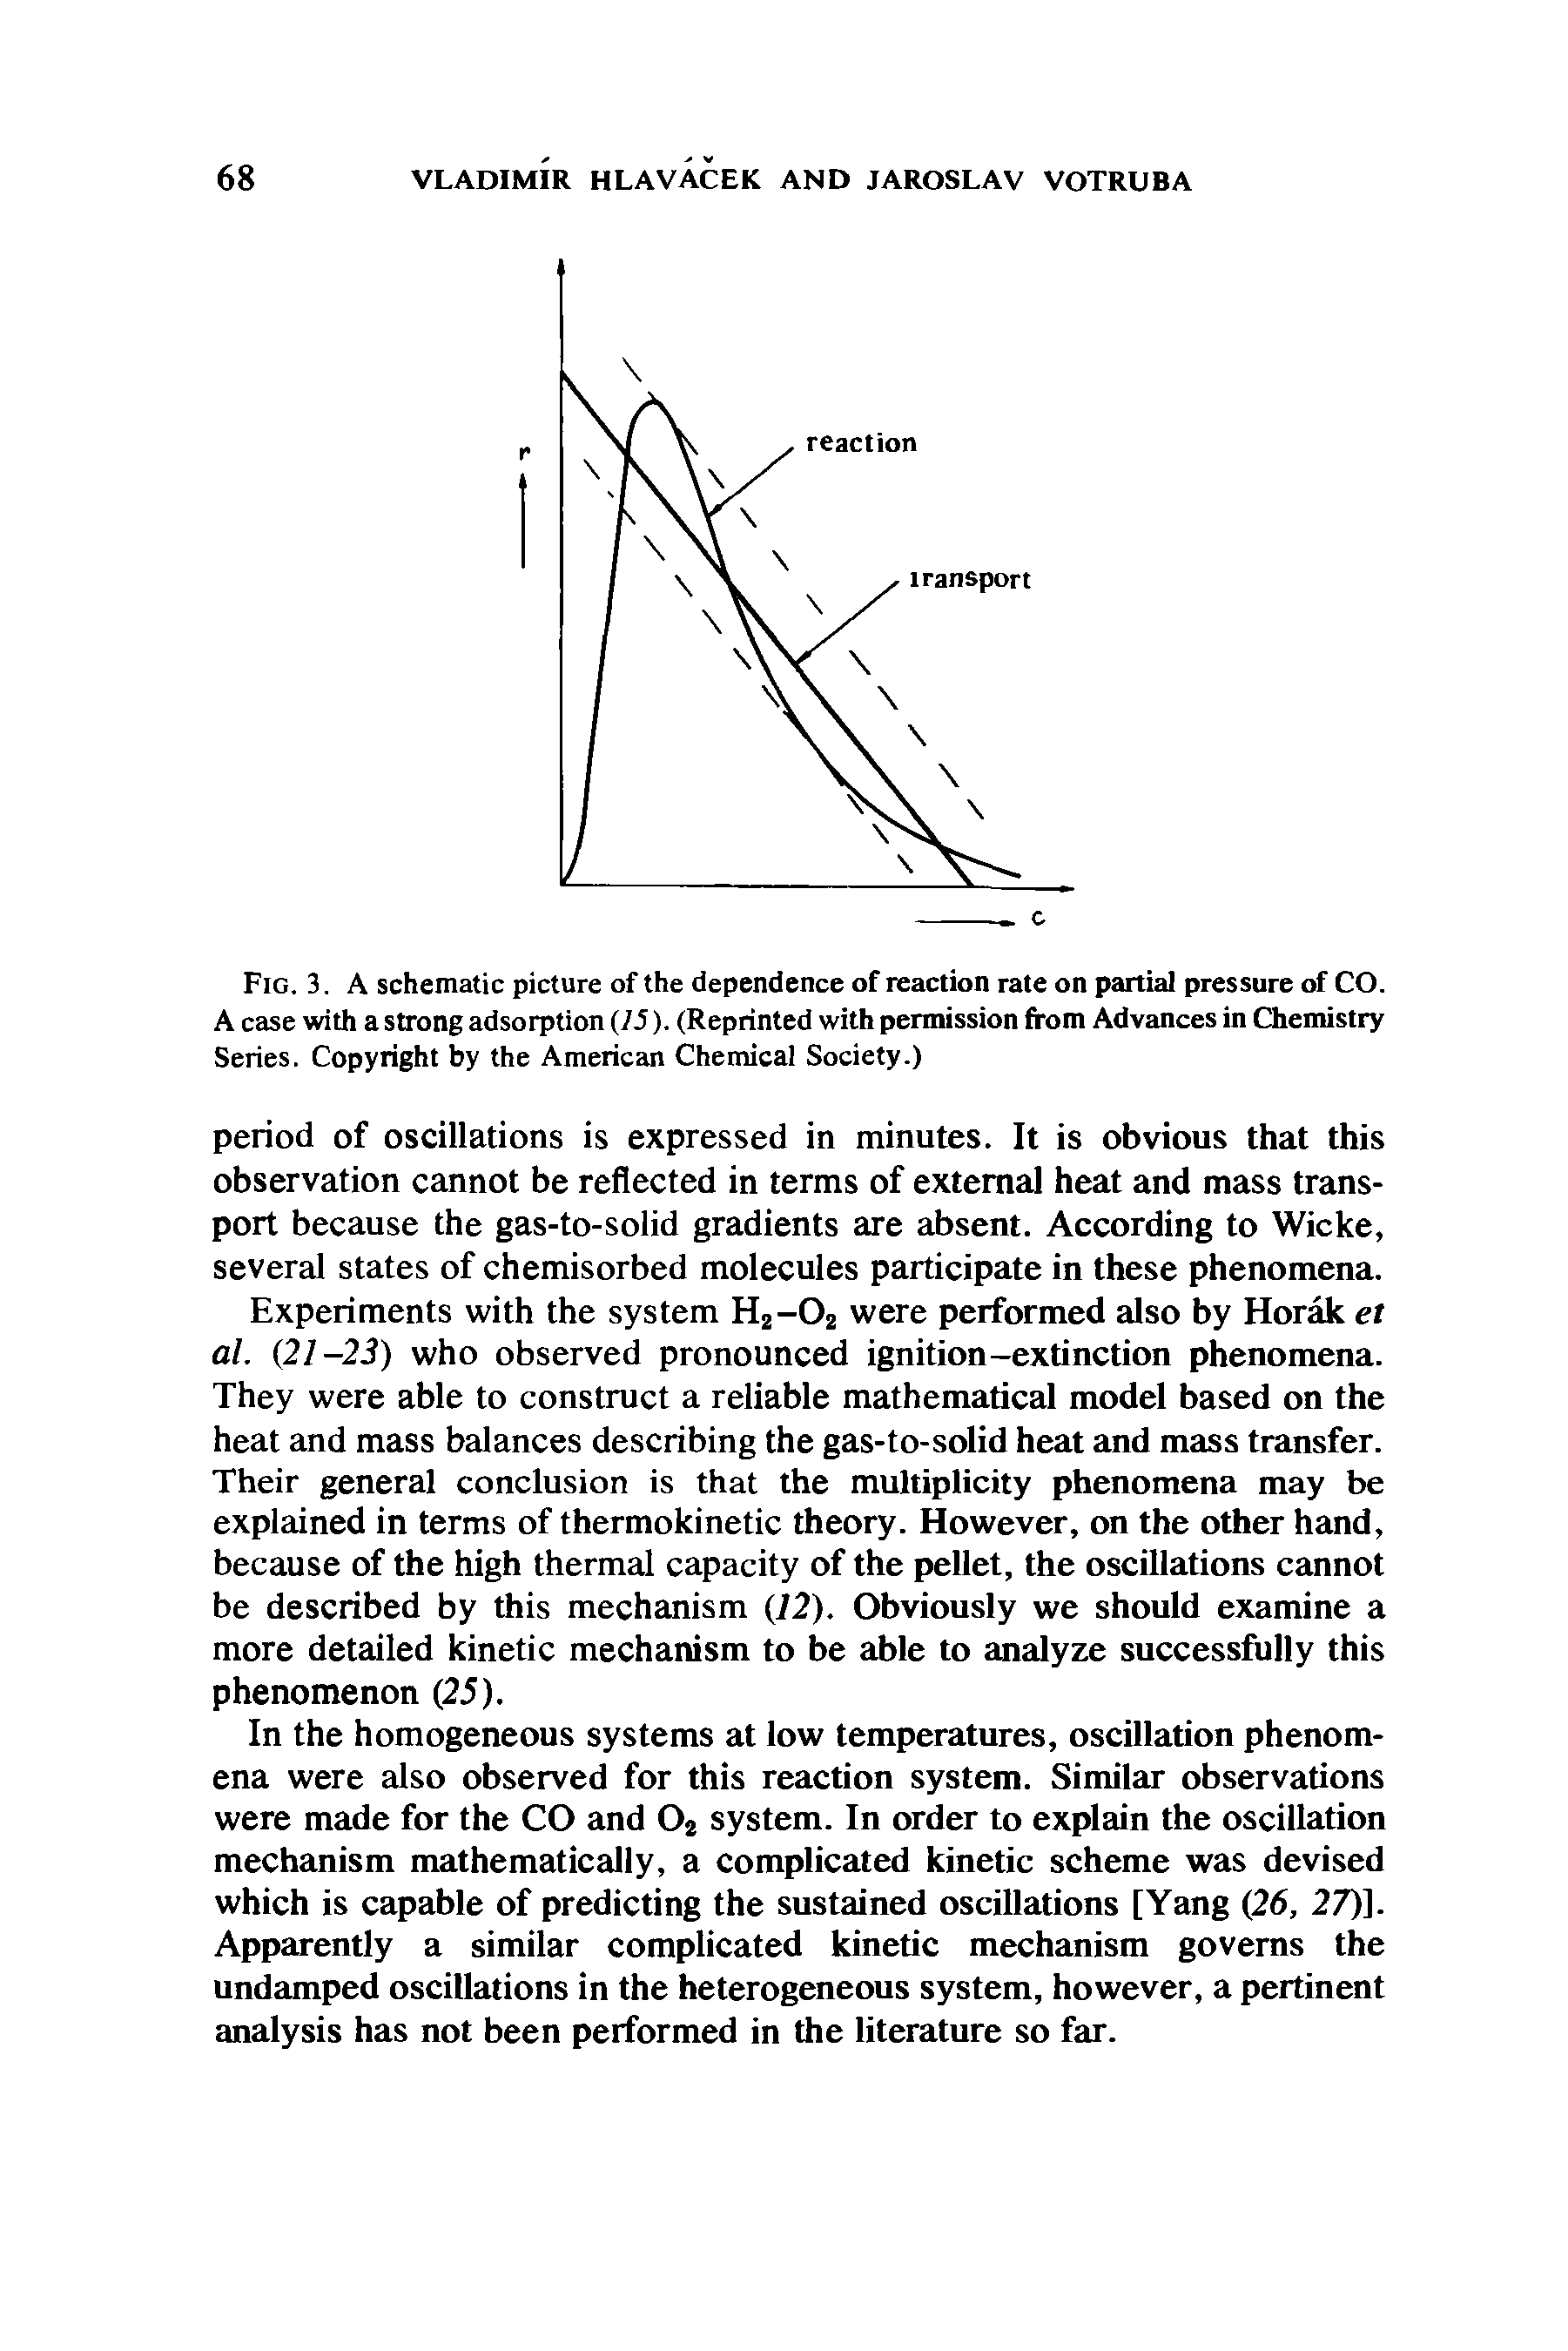 Fig. 3. A schematic picture of the dependence of reaction rate on partial pressure of CO. A case with a strong adsorption (7.5). (Reprinted with permission from Advances in Chemistry Series. Copyright by the American Chemical Society.)...